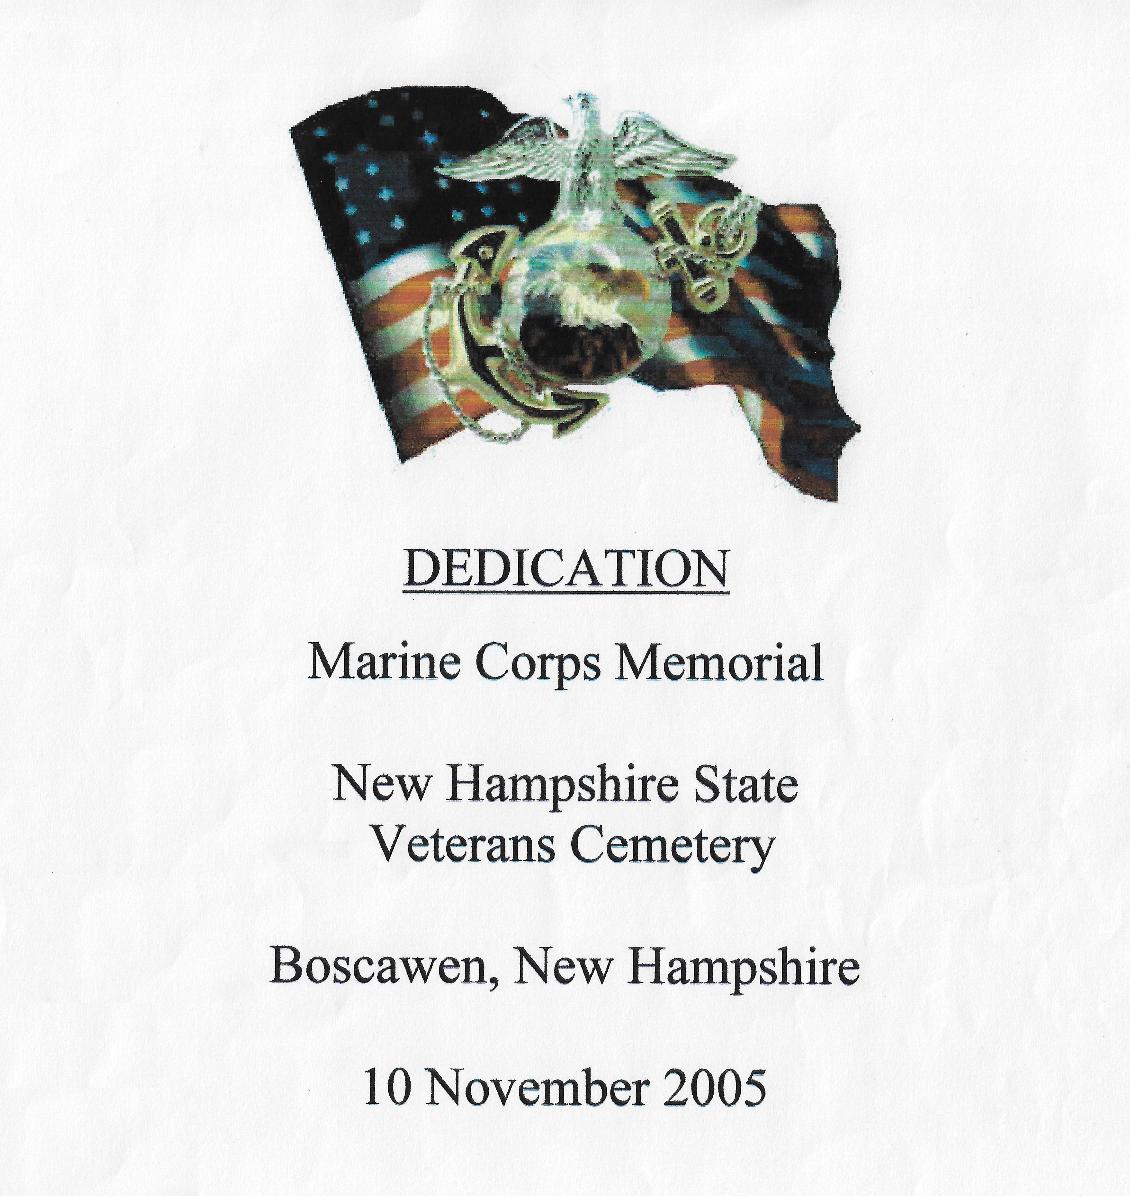 US Marine Corps Memorial Dedication at the NH State Veterans Cemetery